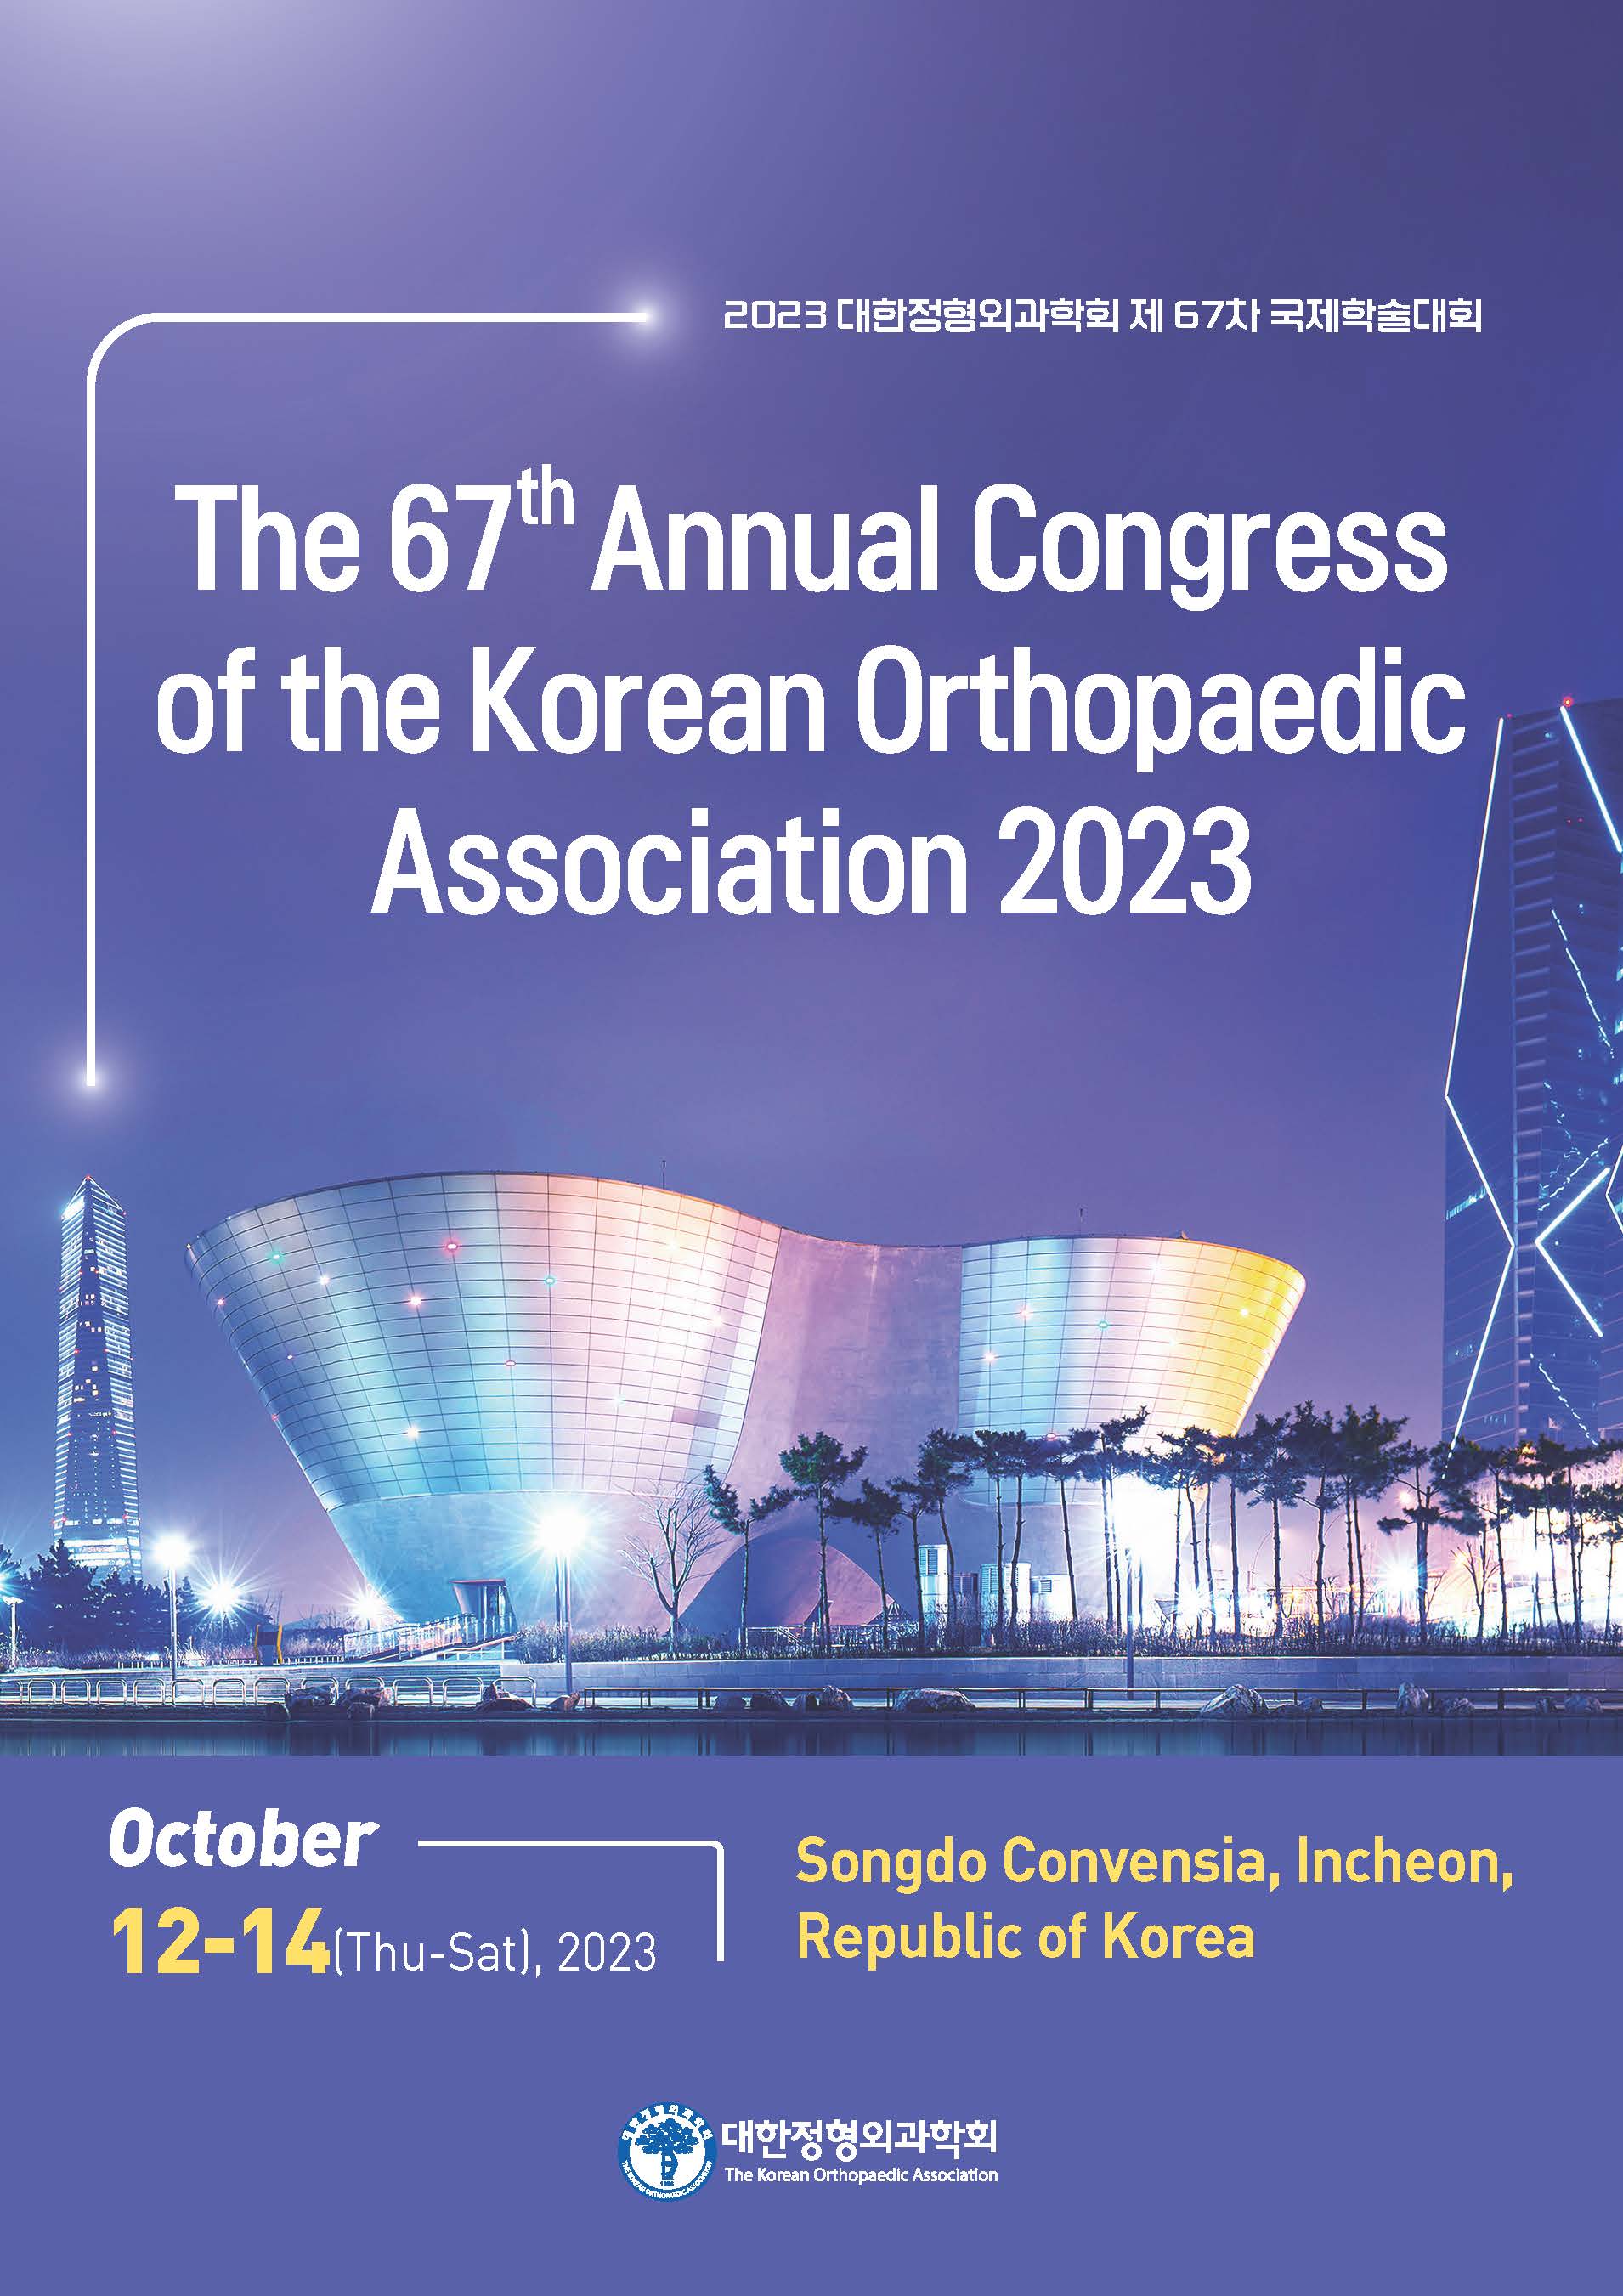 The 67th Spring Congress of the Korean Orthopaedic Association